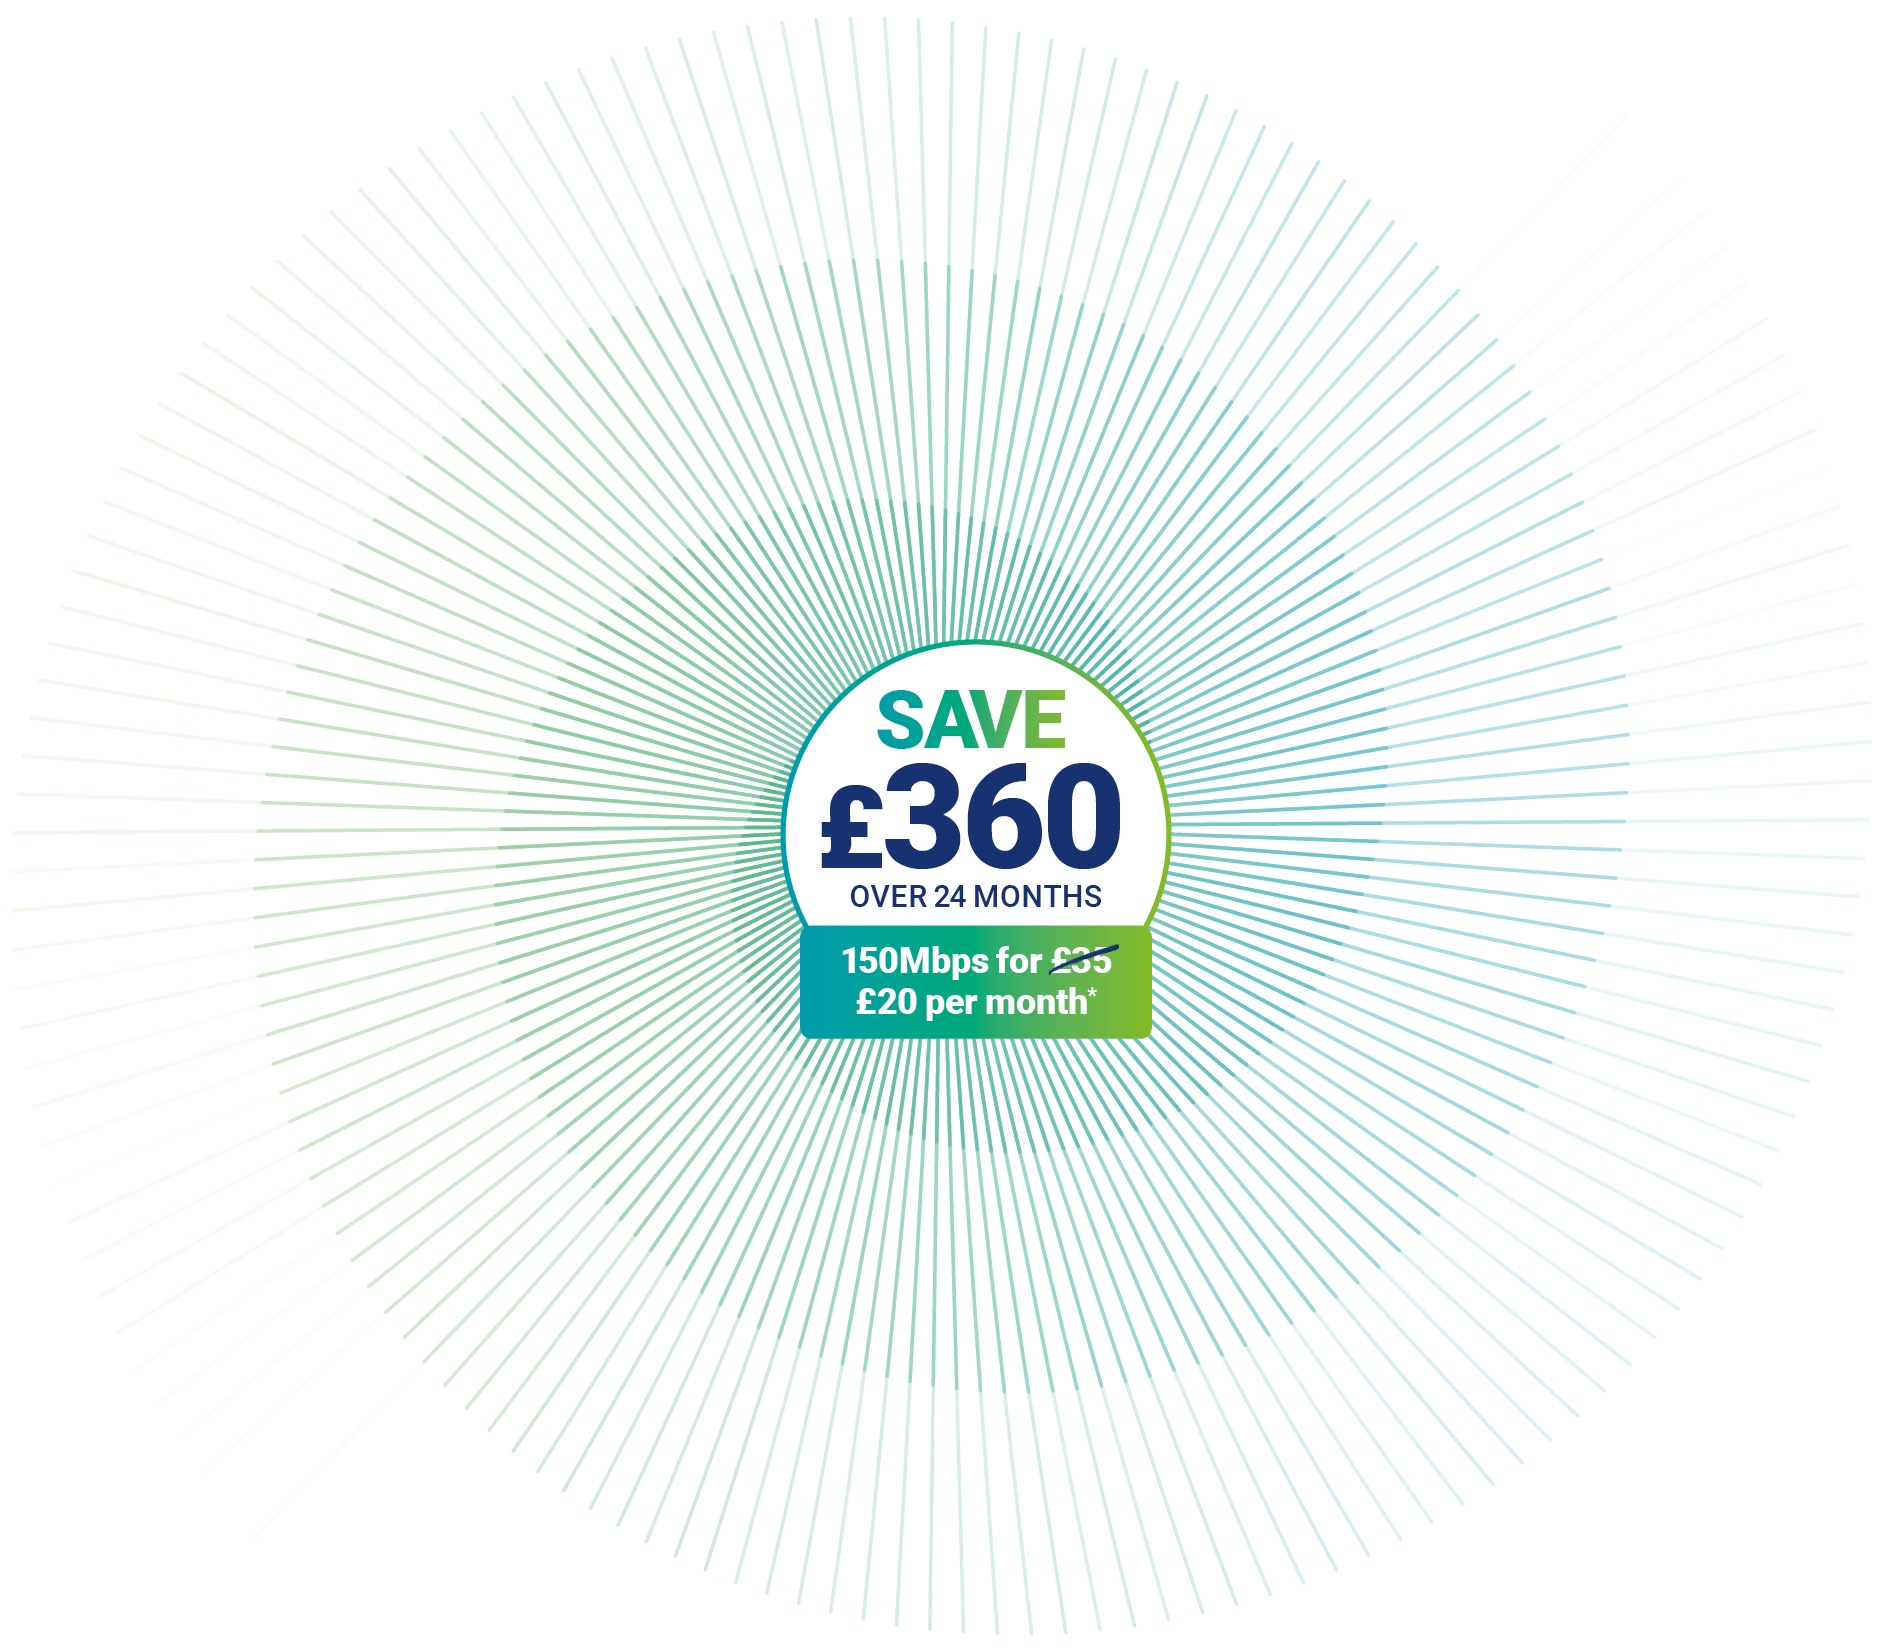 Save £360 on Jurassic Fibre broadband over 24 months with our fixed price.